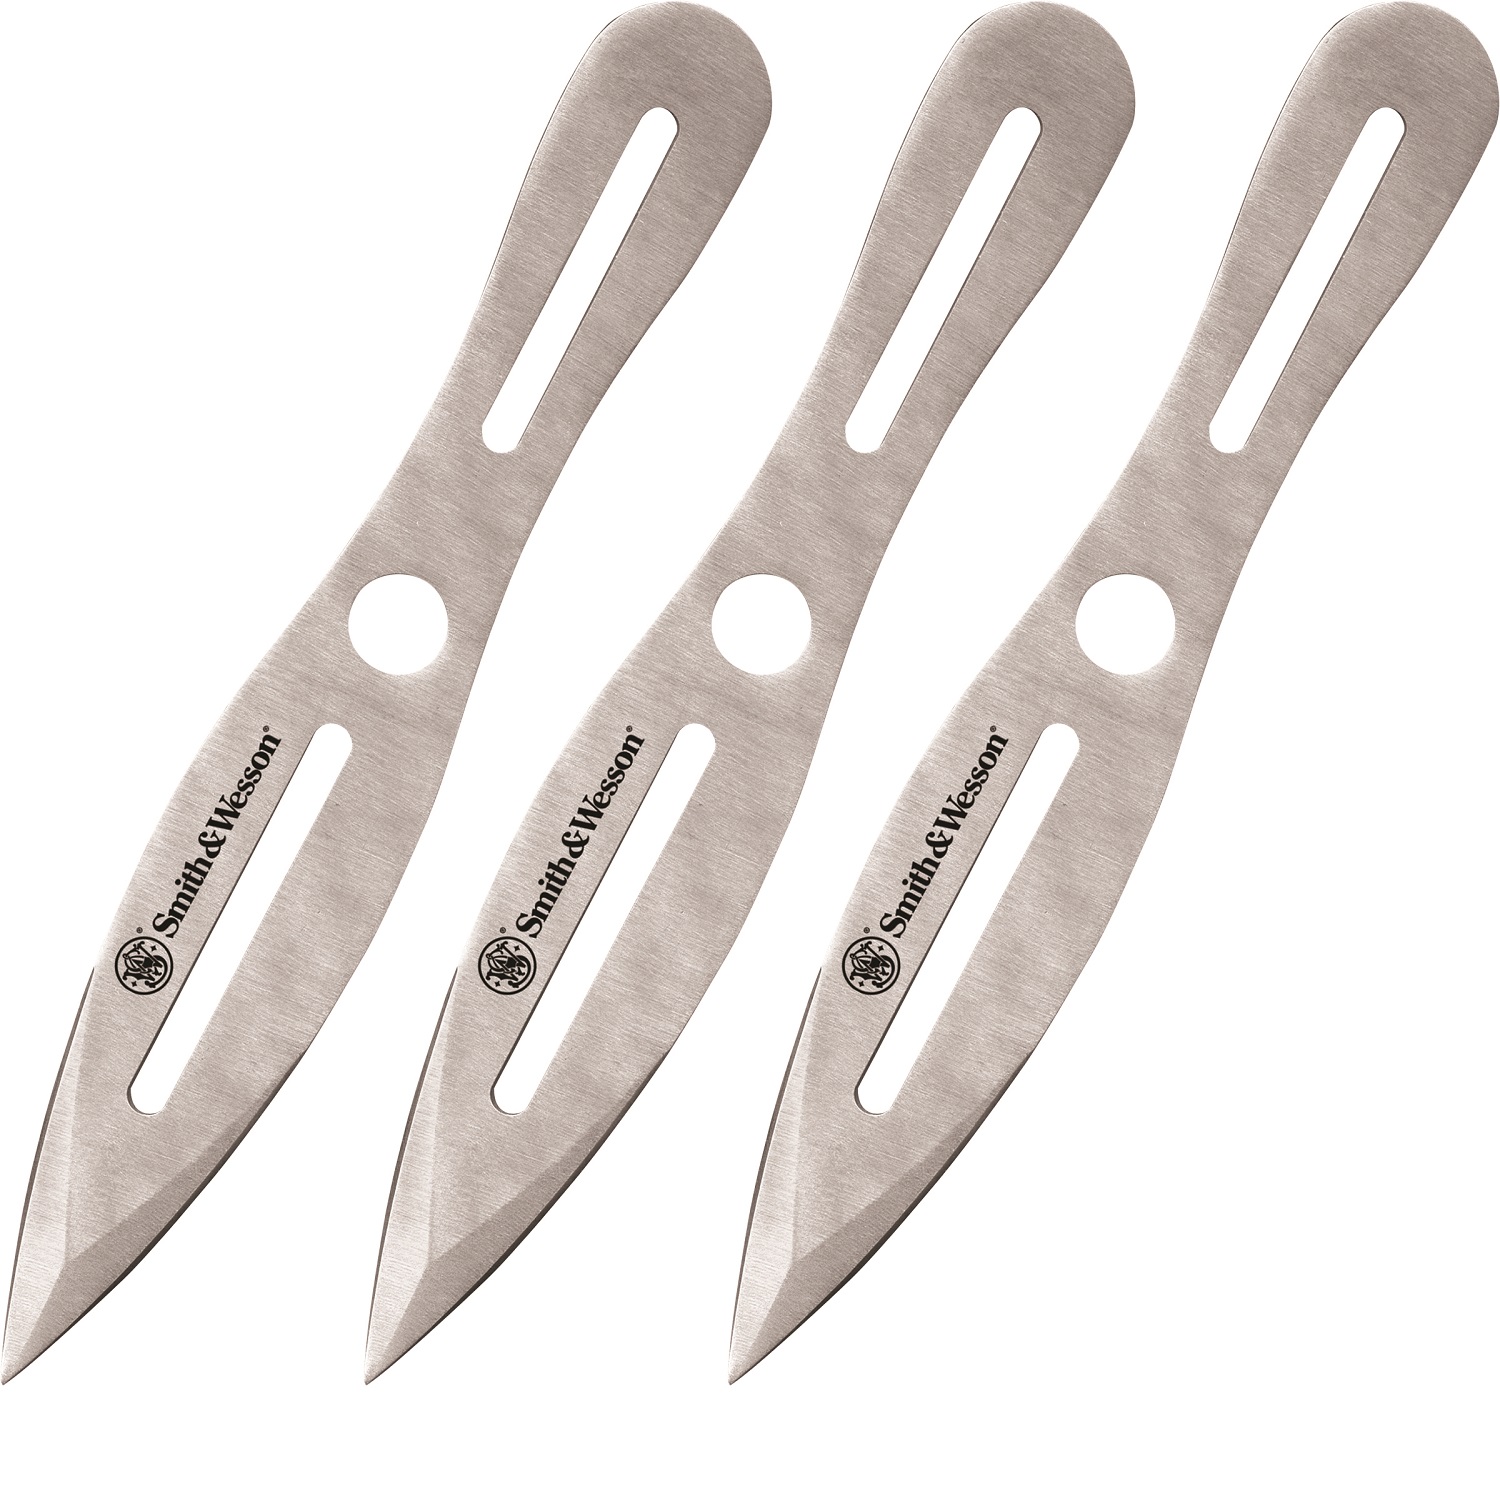 Taylor Brands Smith and Wesson 3 Pack 10in Throwing Knives